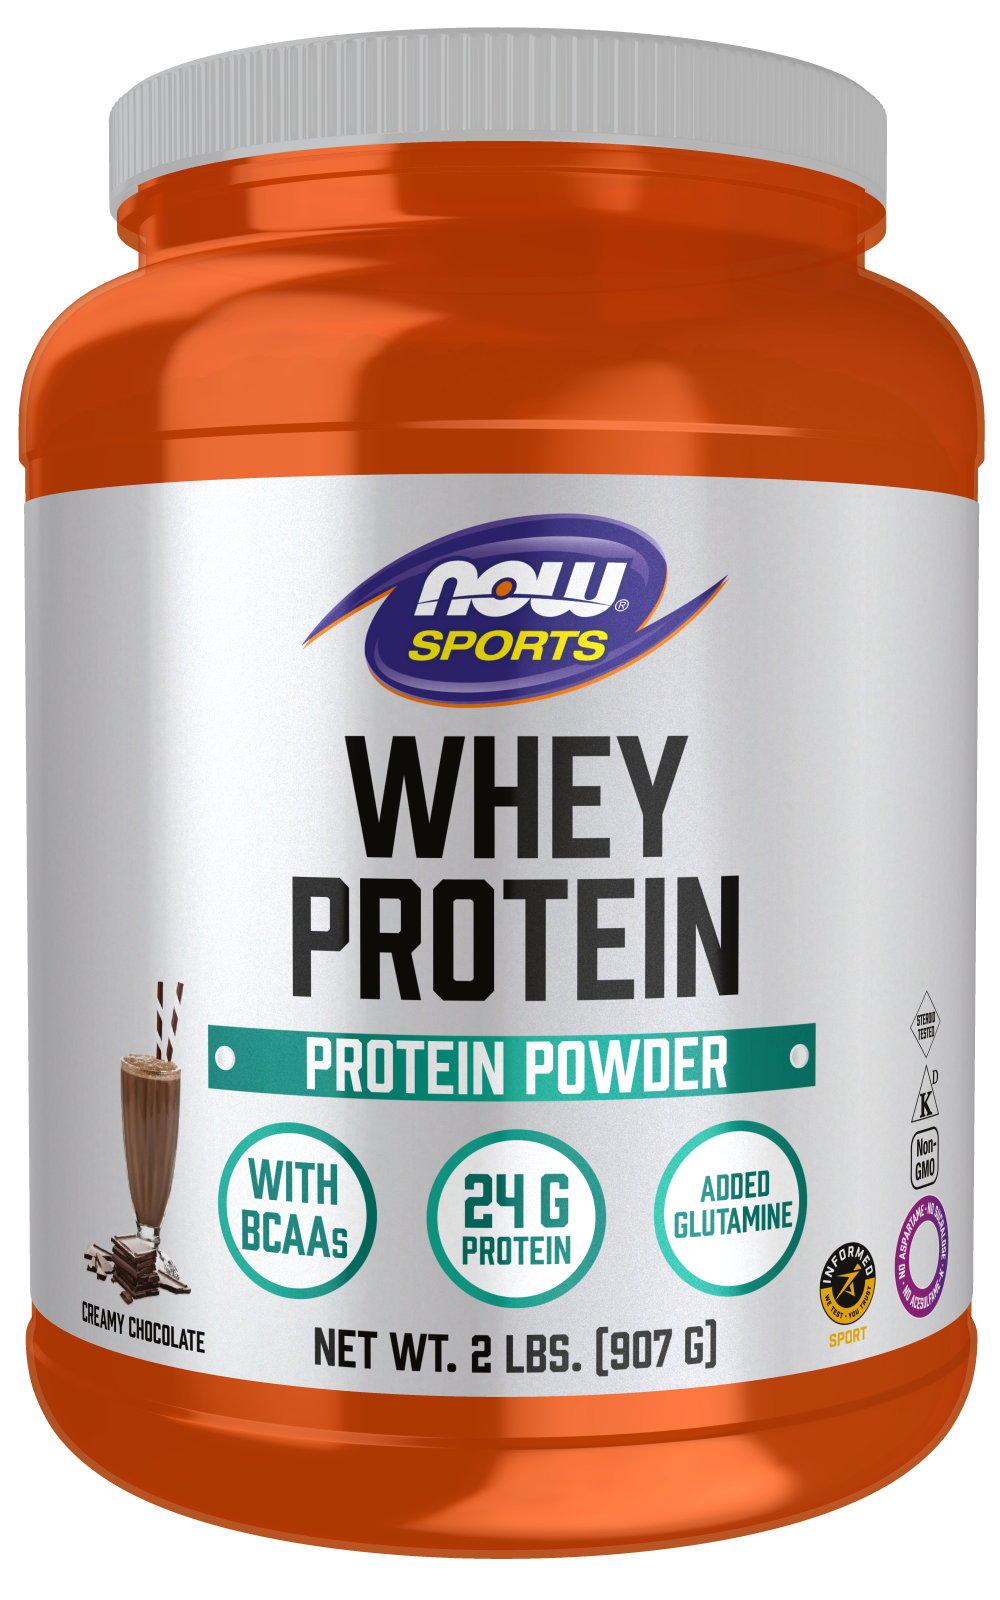 Whey Protein Creamy Chocolate Powder - 2 lbs. Bottle Front